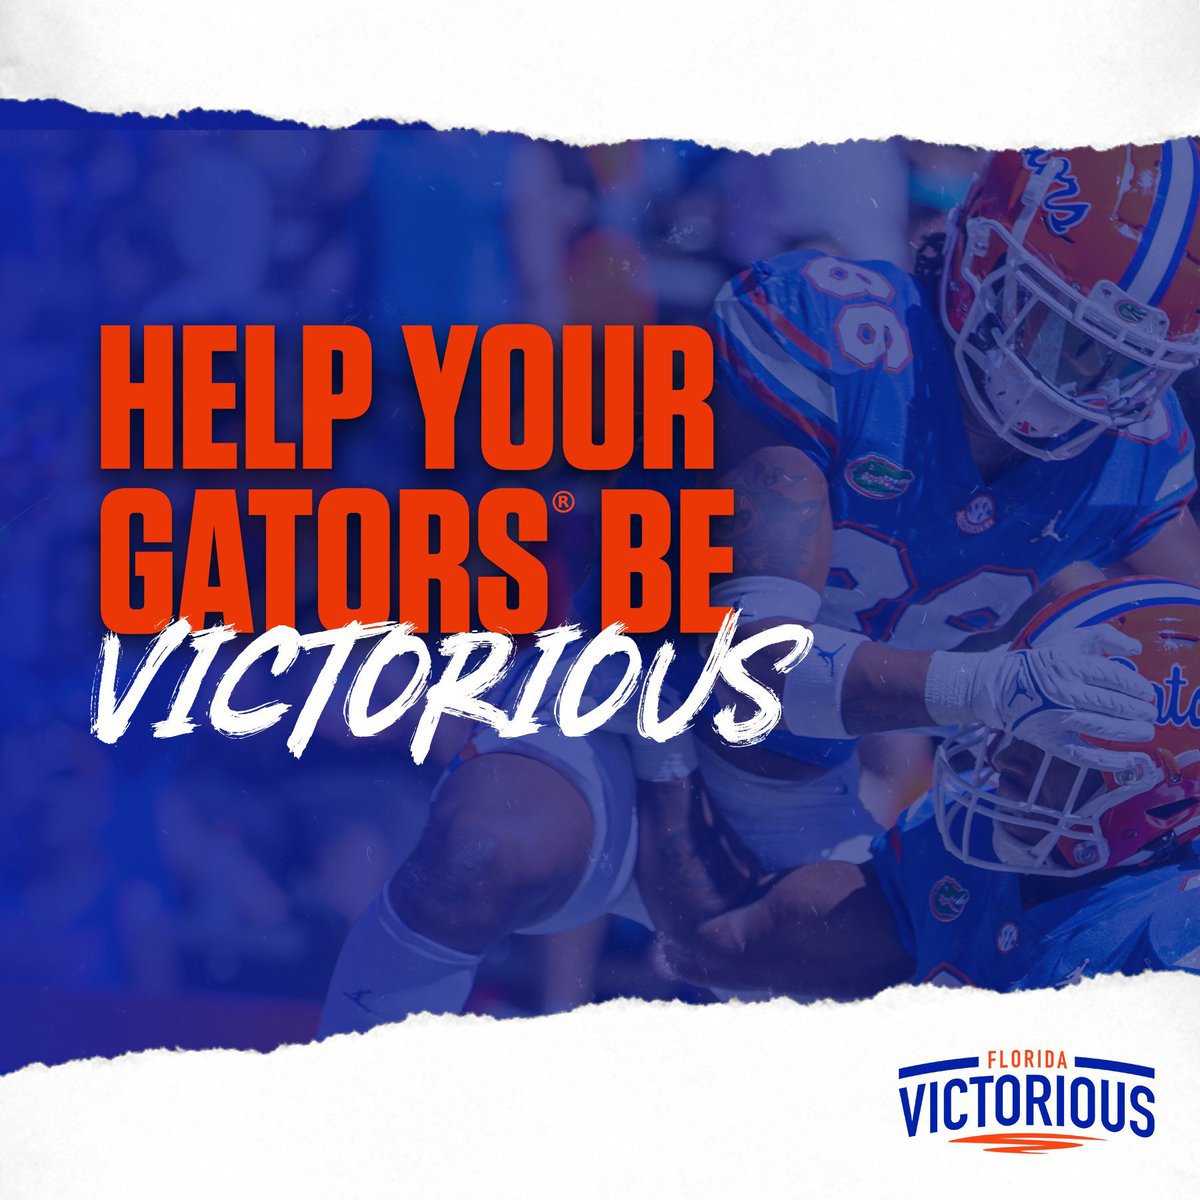 Unfinished business. And we need your support. Join the team: floridavictorious.com/join-now/. Go Gators! #fvfoundation